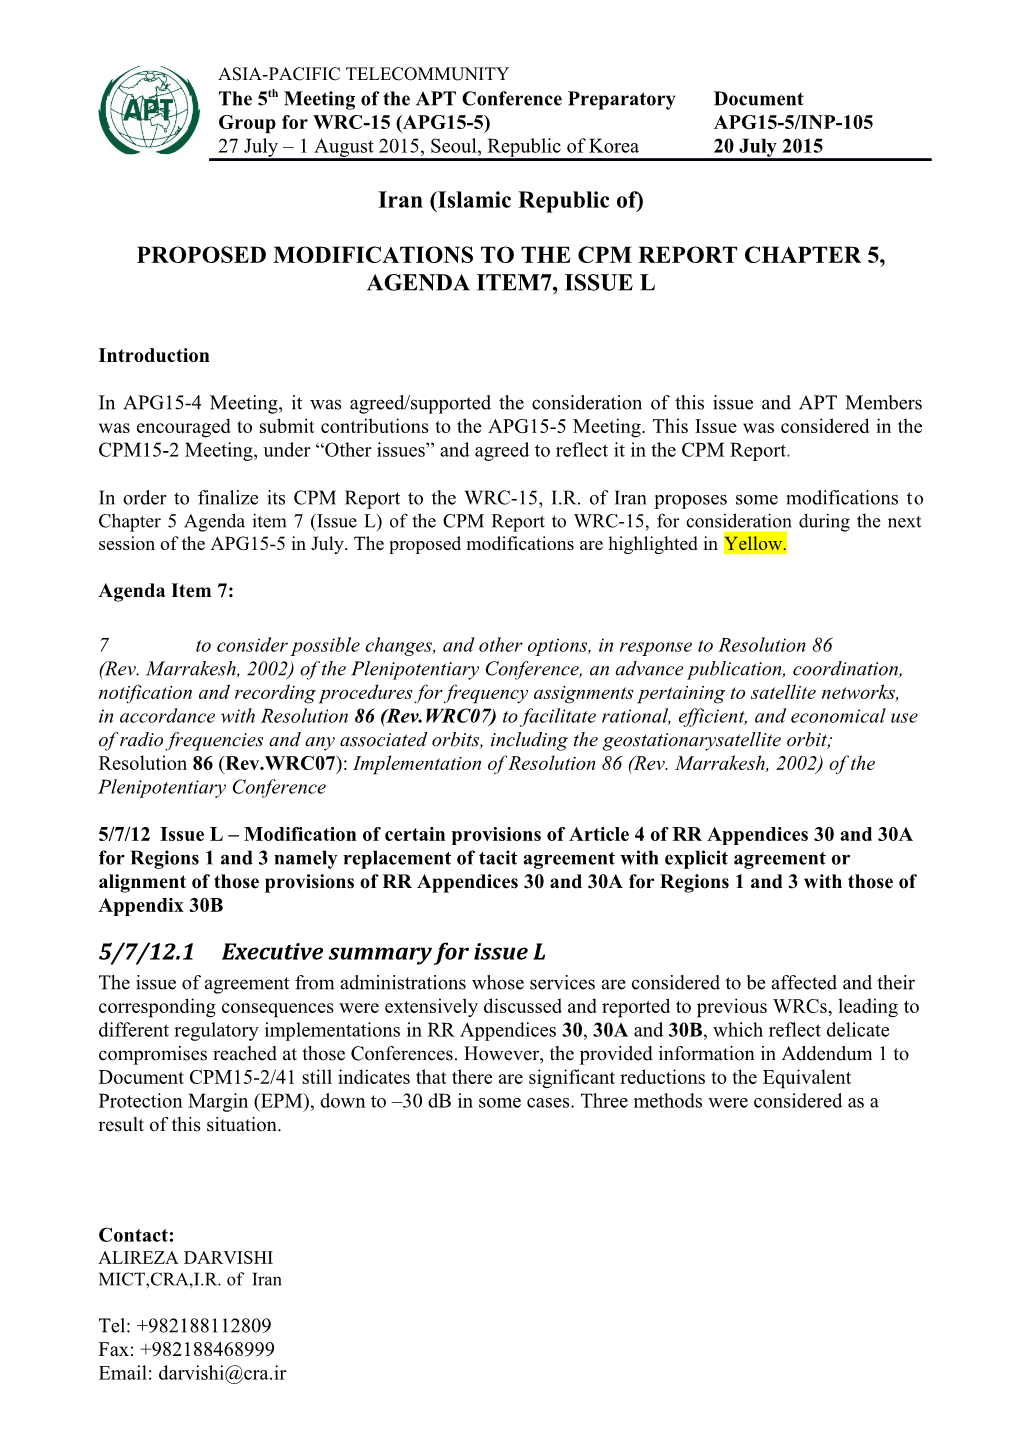 Proposed Modifications to the Cpm Reportchapter 5, Agenda Item7, Issue L